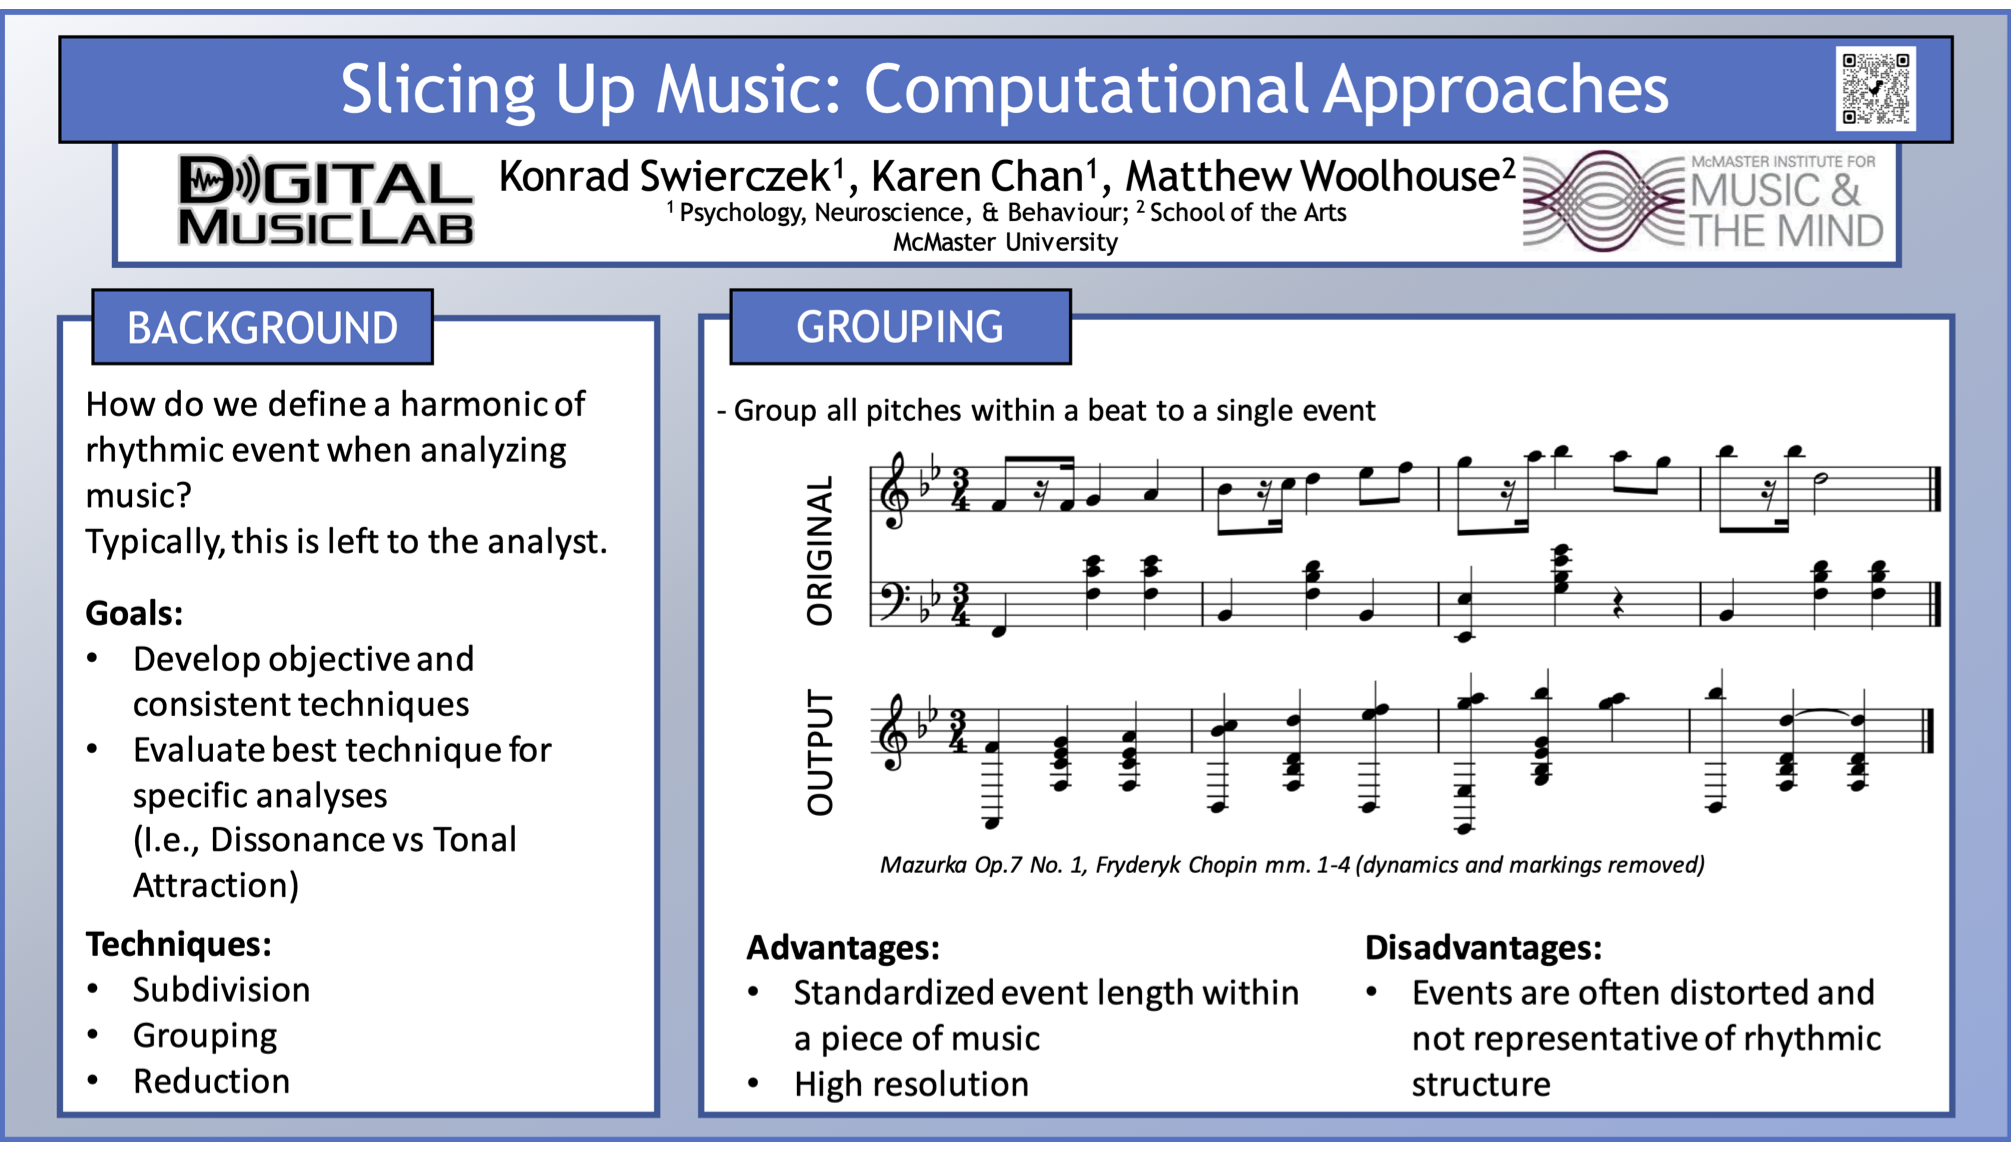 Part 2 of 3 of the Poster for Slicing up music: Computational Approaches